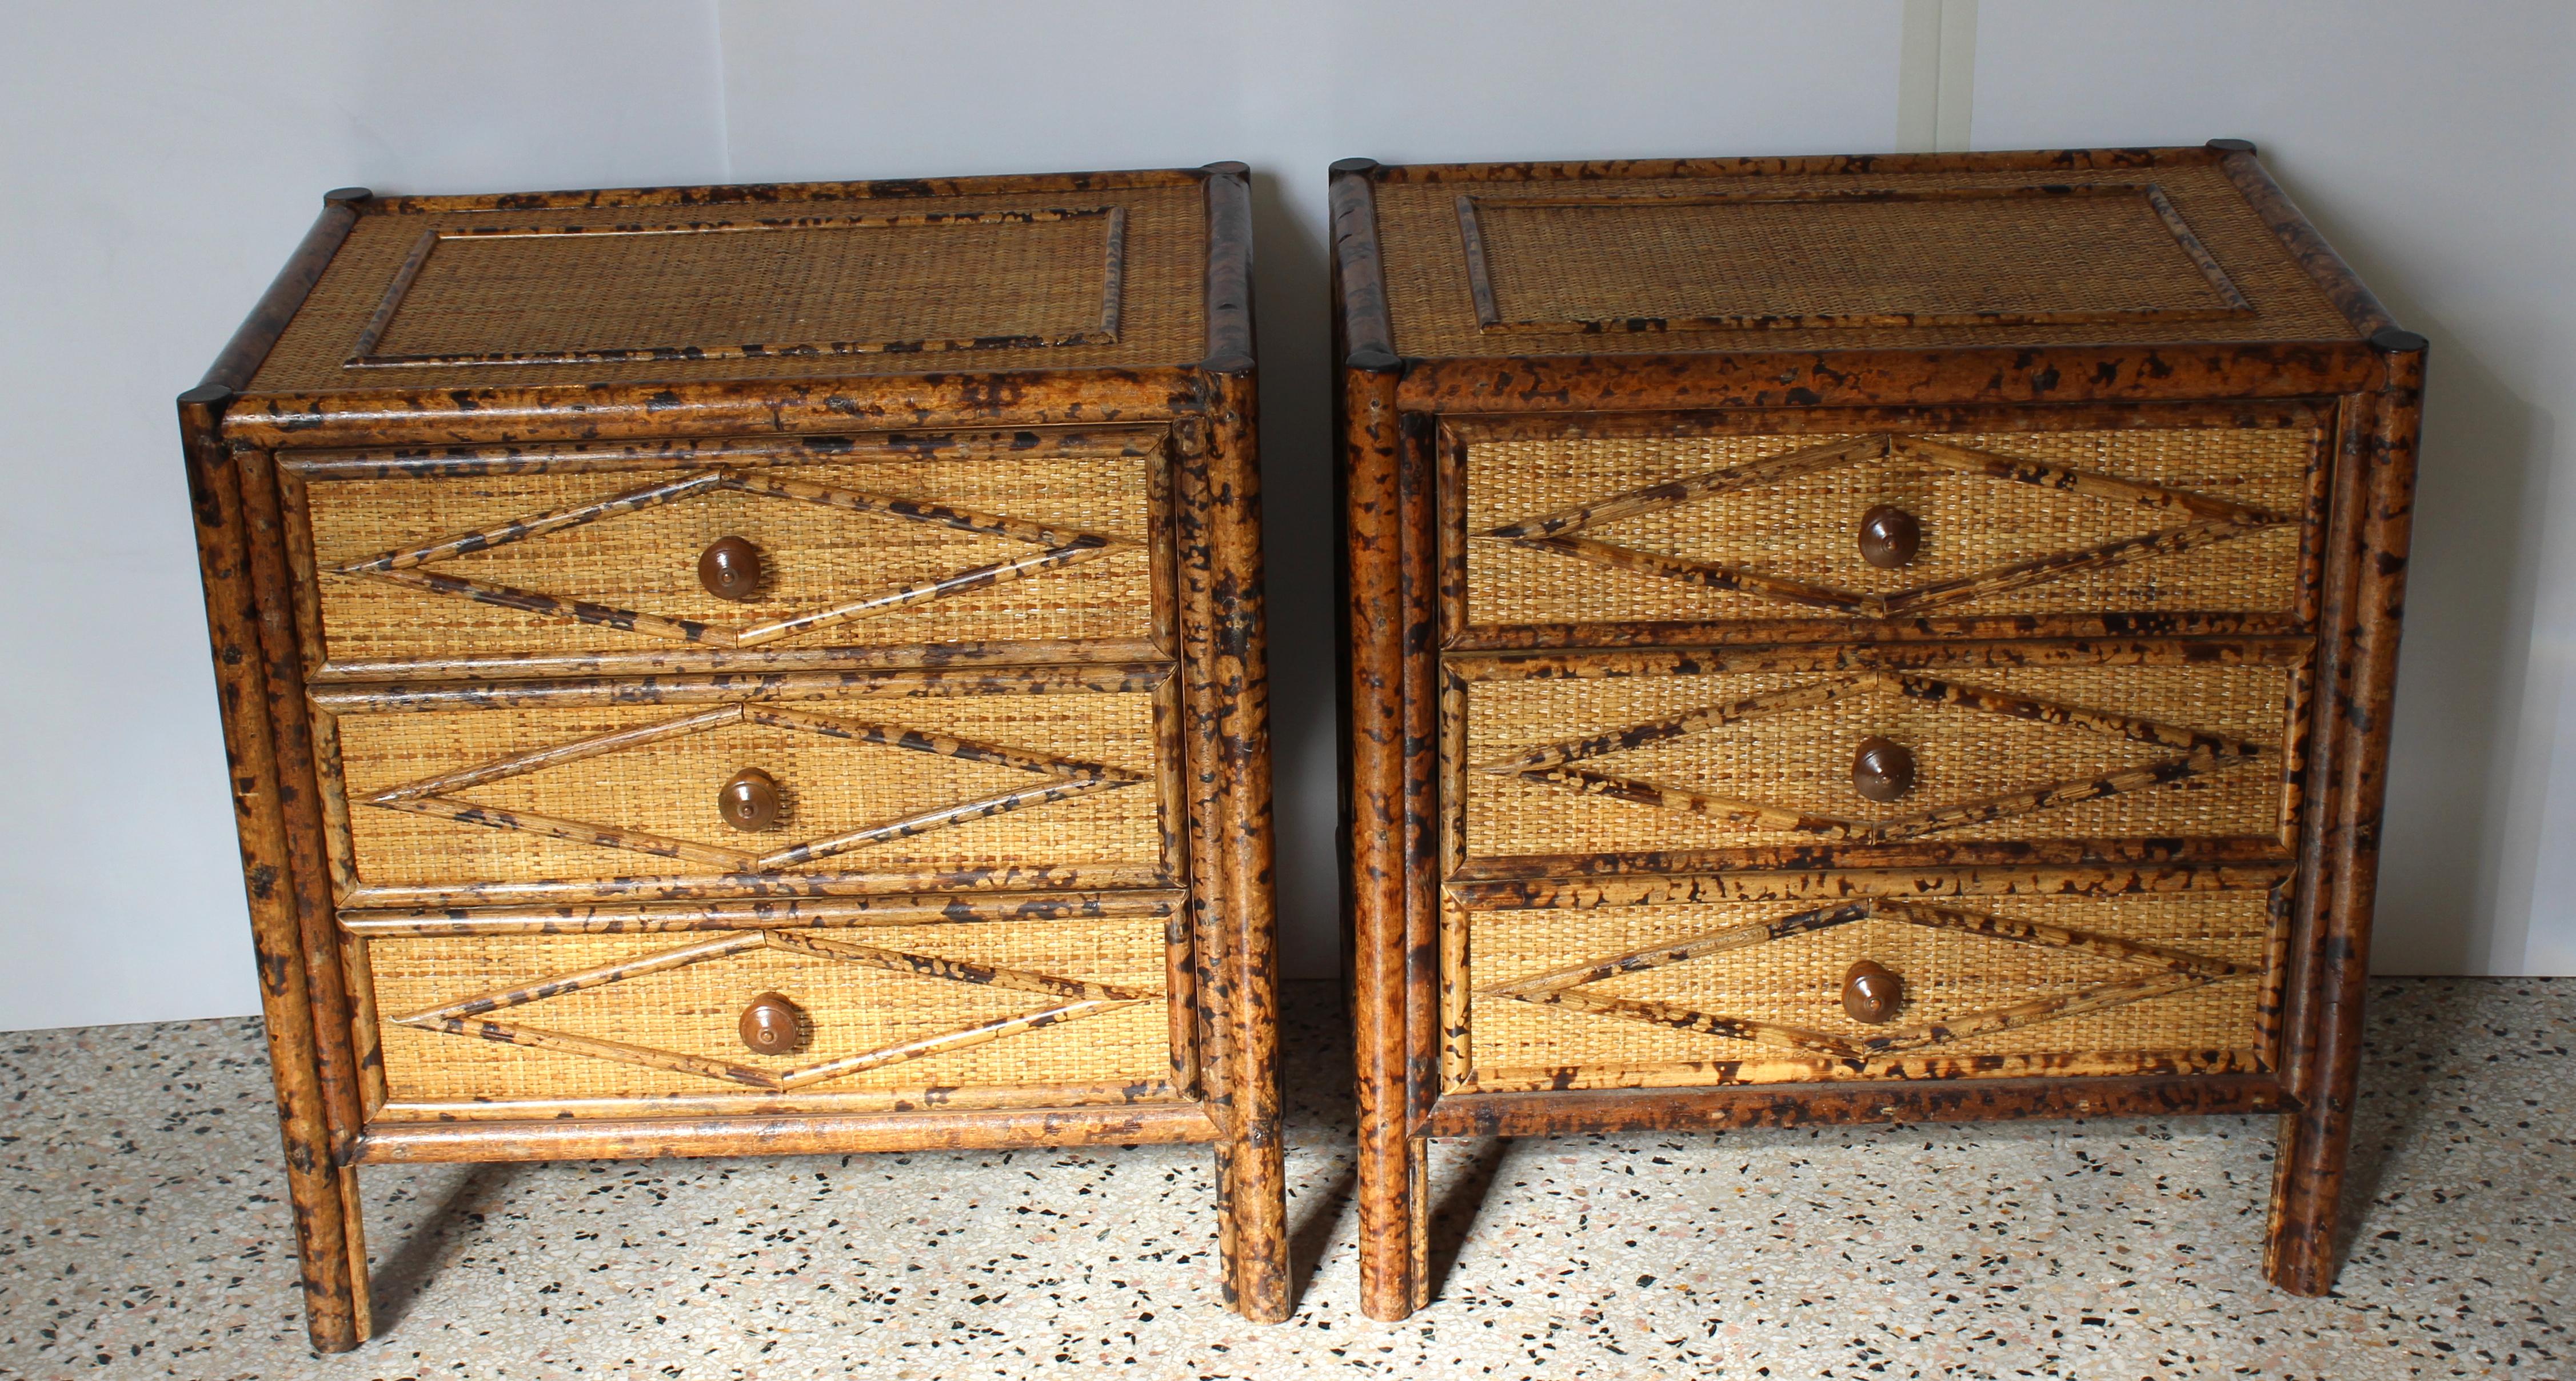 This stylish pair of tortoise bamboo and woven rattan nightstands date to the 1990s and they will add a bit of exoticness to your home.